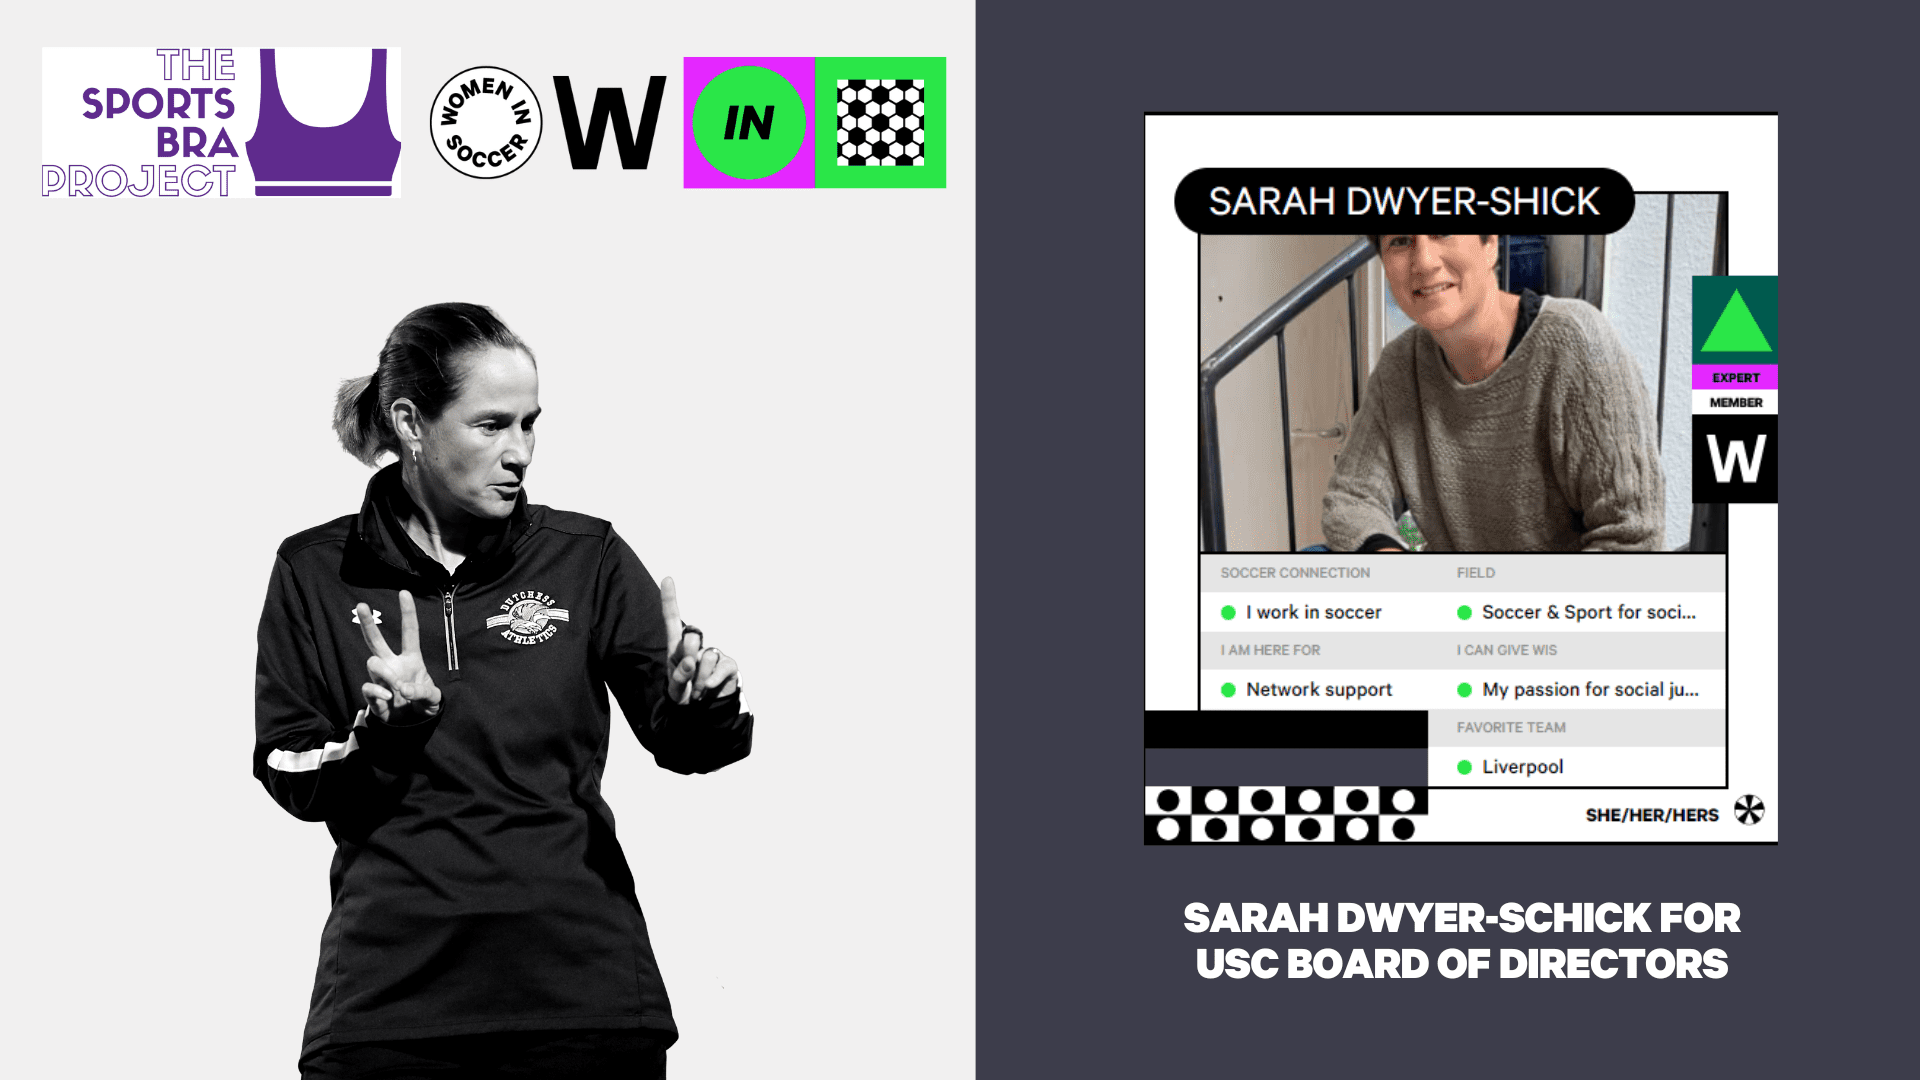 <strong>SARAH DWYER-SHICK FOR UNITED SOCCER COACHES BOARD OF DIRECTORS</strong>